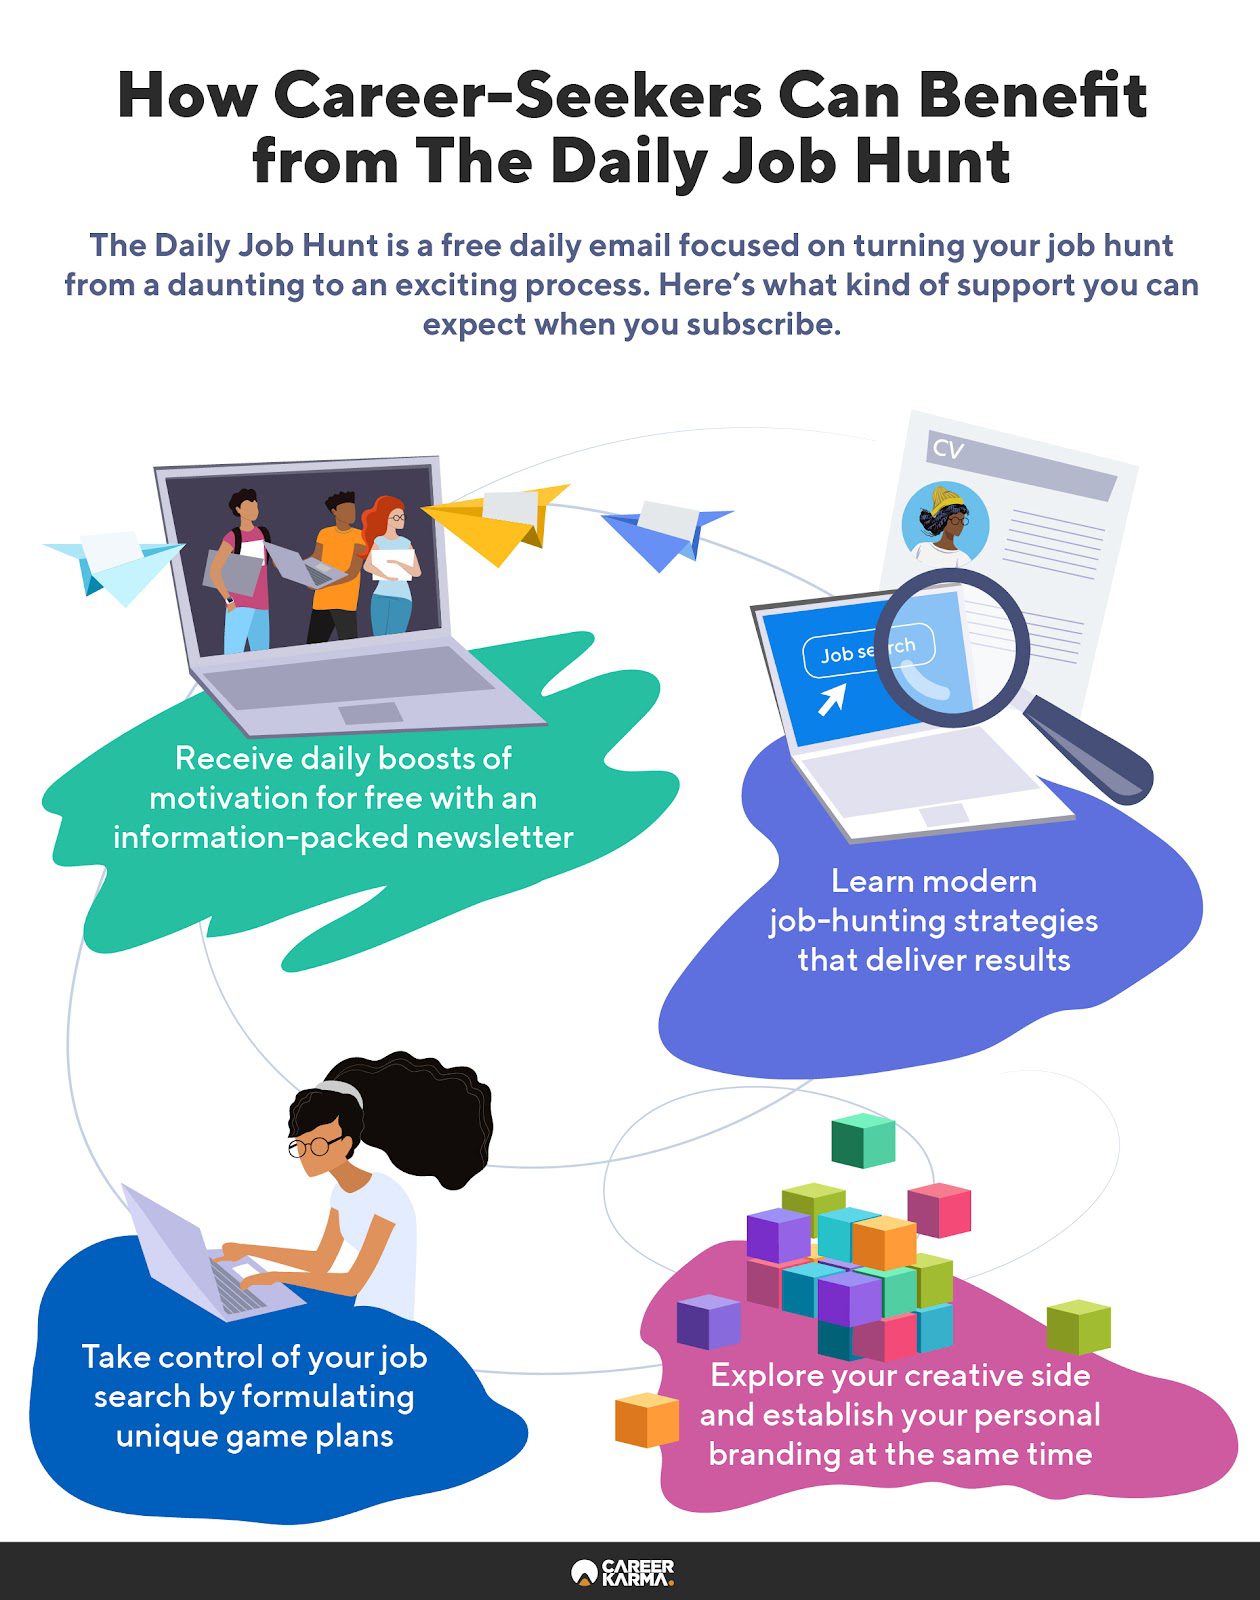 An infographic covering the benefits of subscribing to The Daily Job Hunt